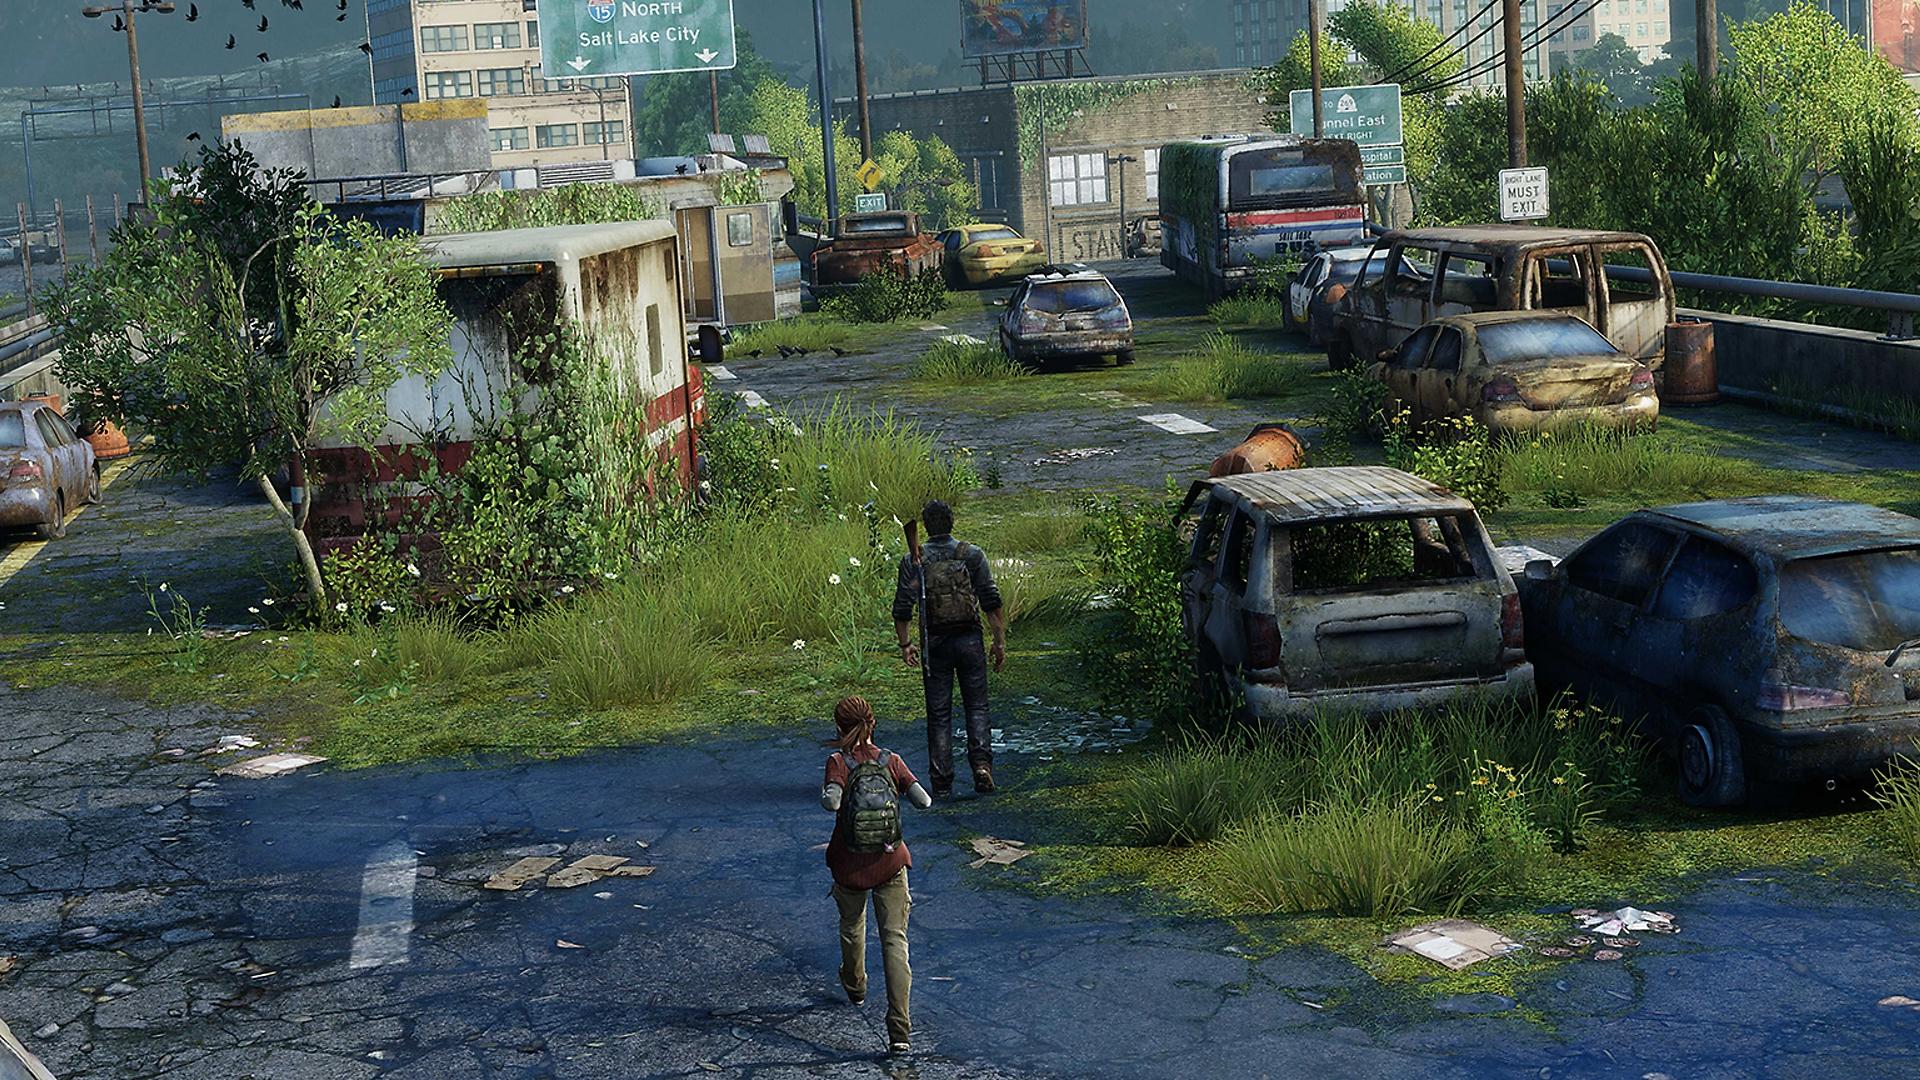 Town of us 3 3 1. The last of us 2 город. The last of us 1. The last of us игра.